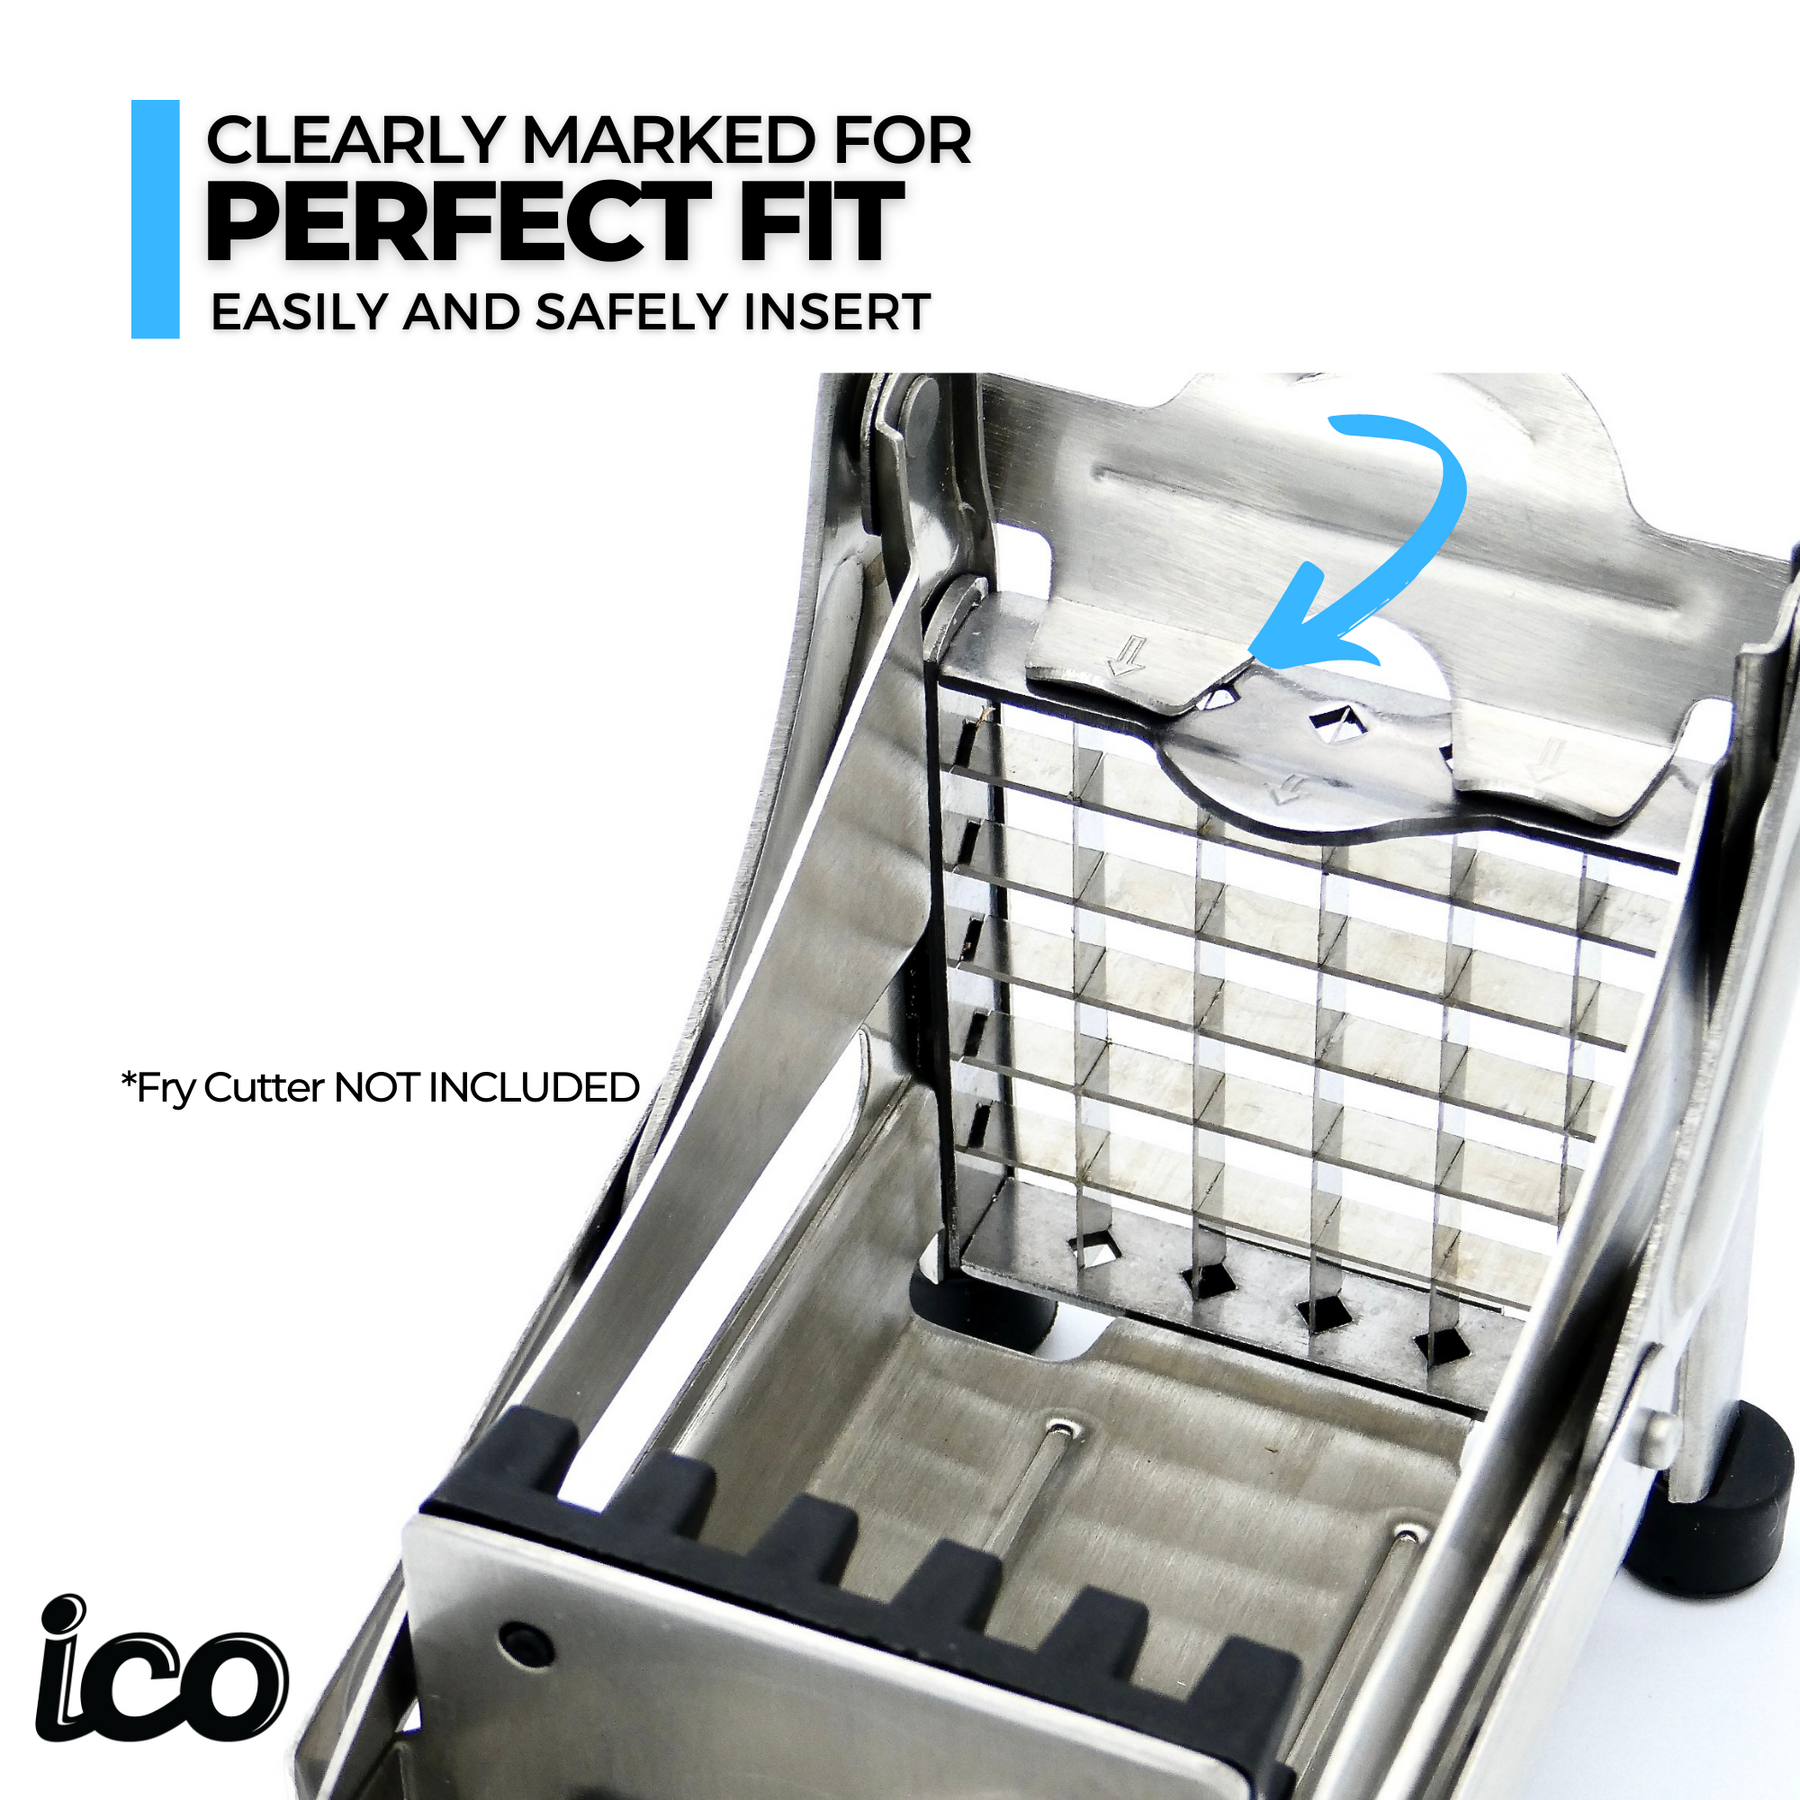 ICO Replacement Fry Cutter Small Blade and Pusher